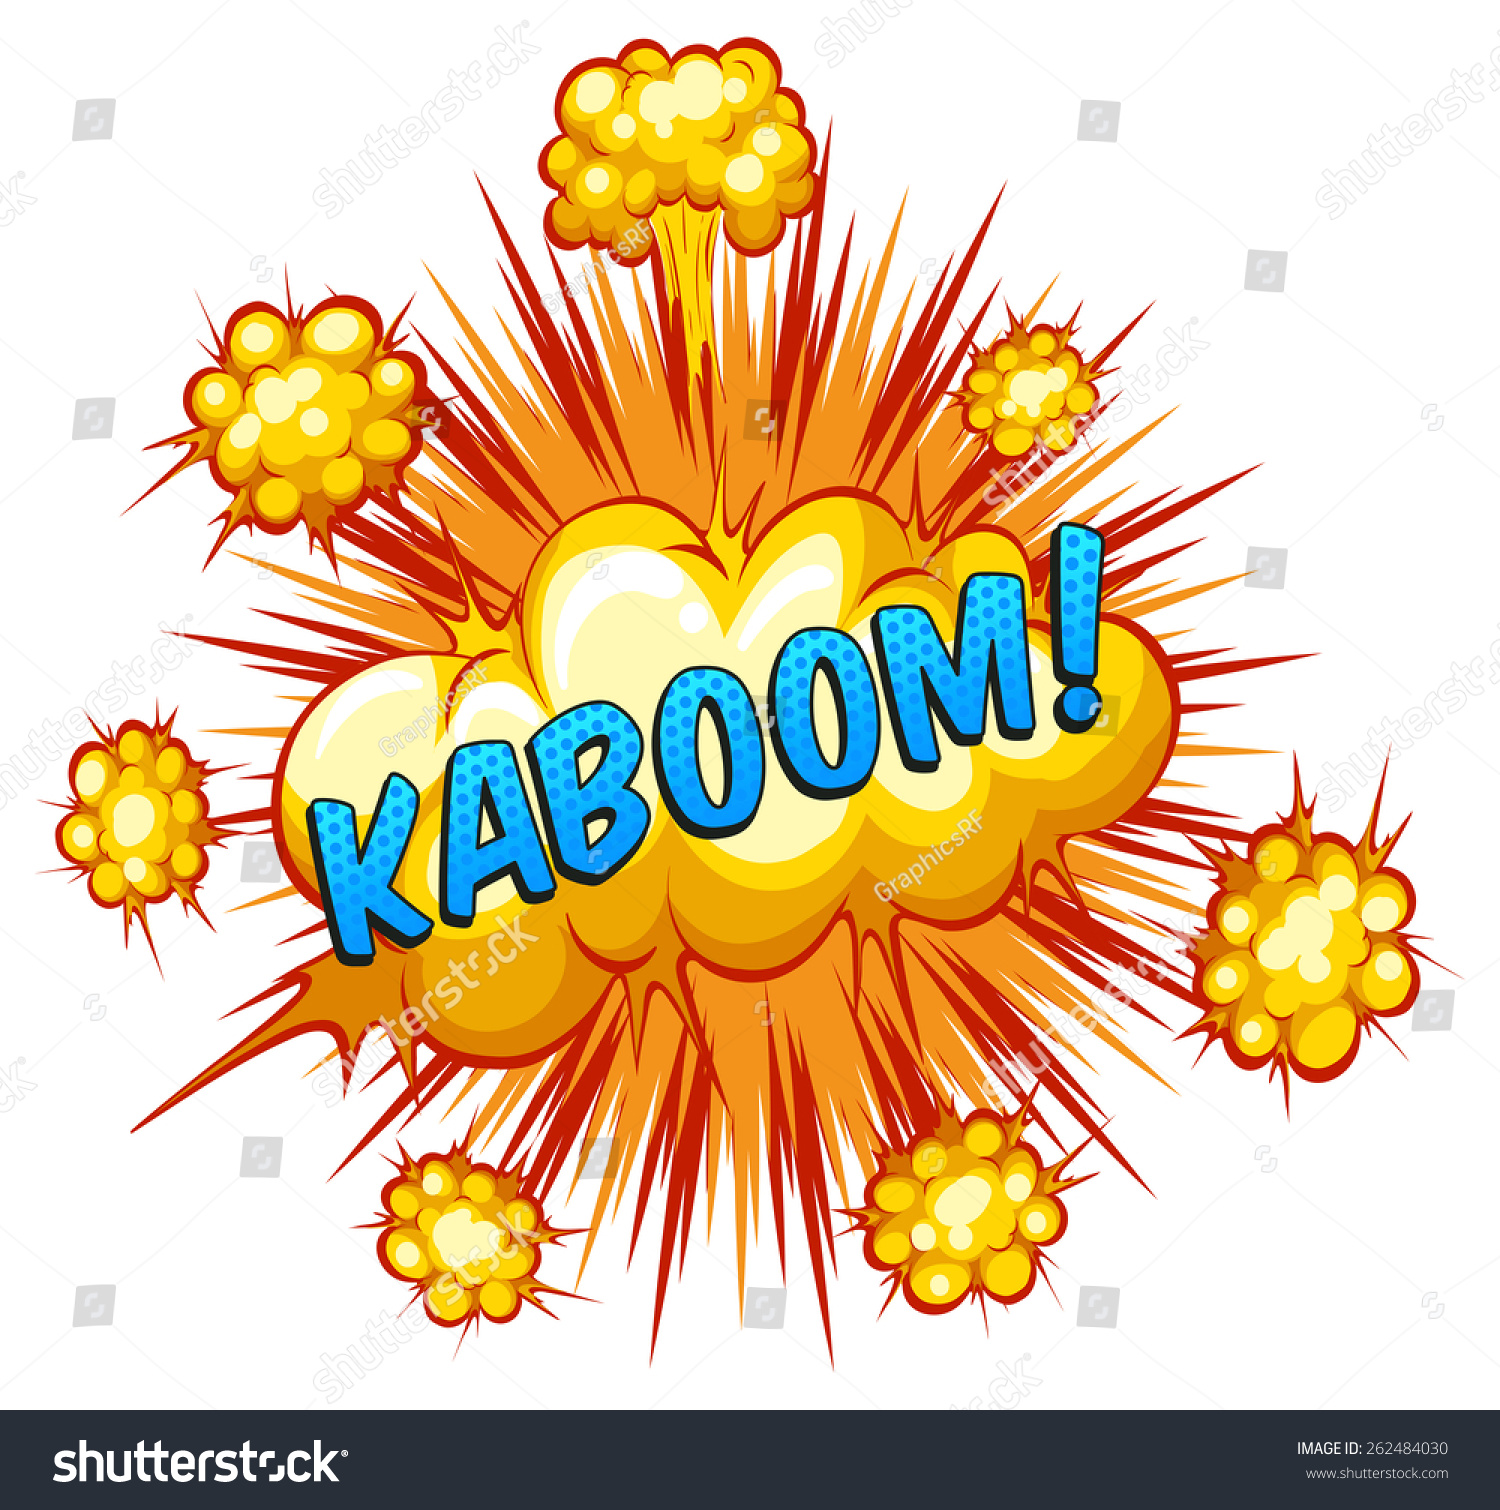 Word Kaboom Explosion Background Stock Vector Royalty